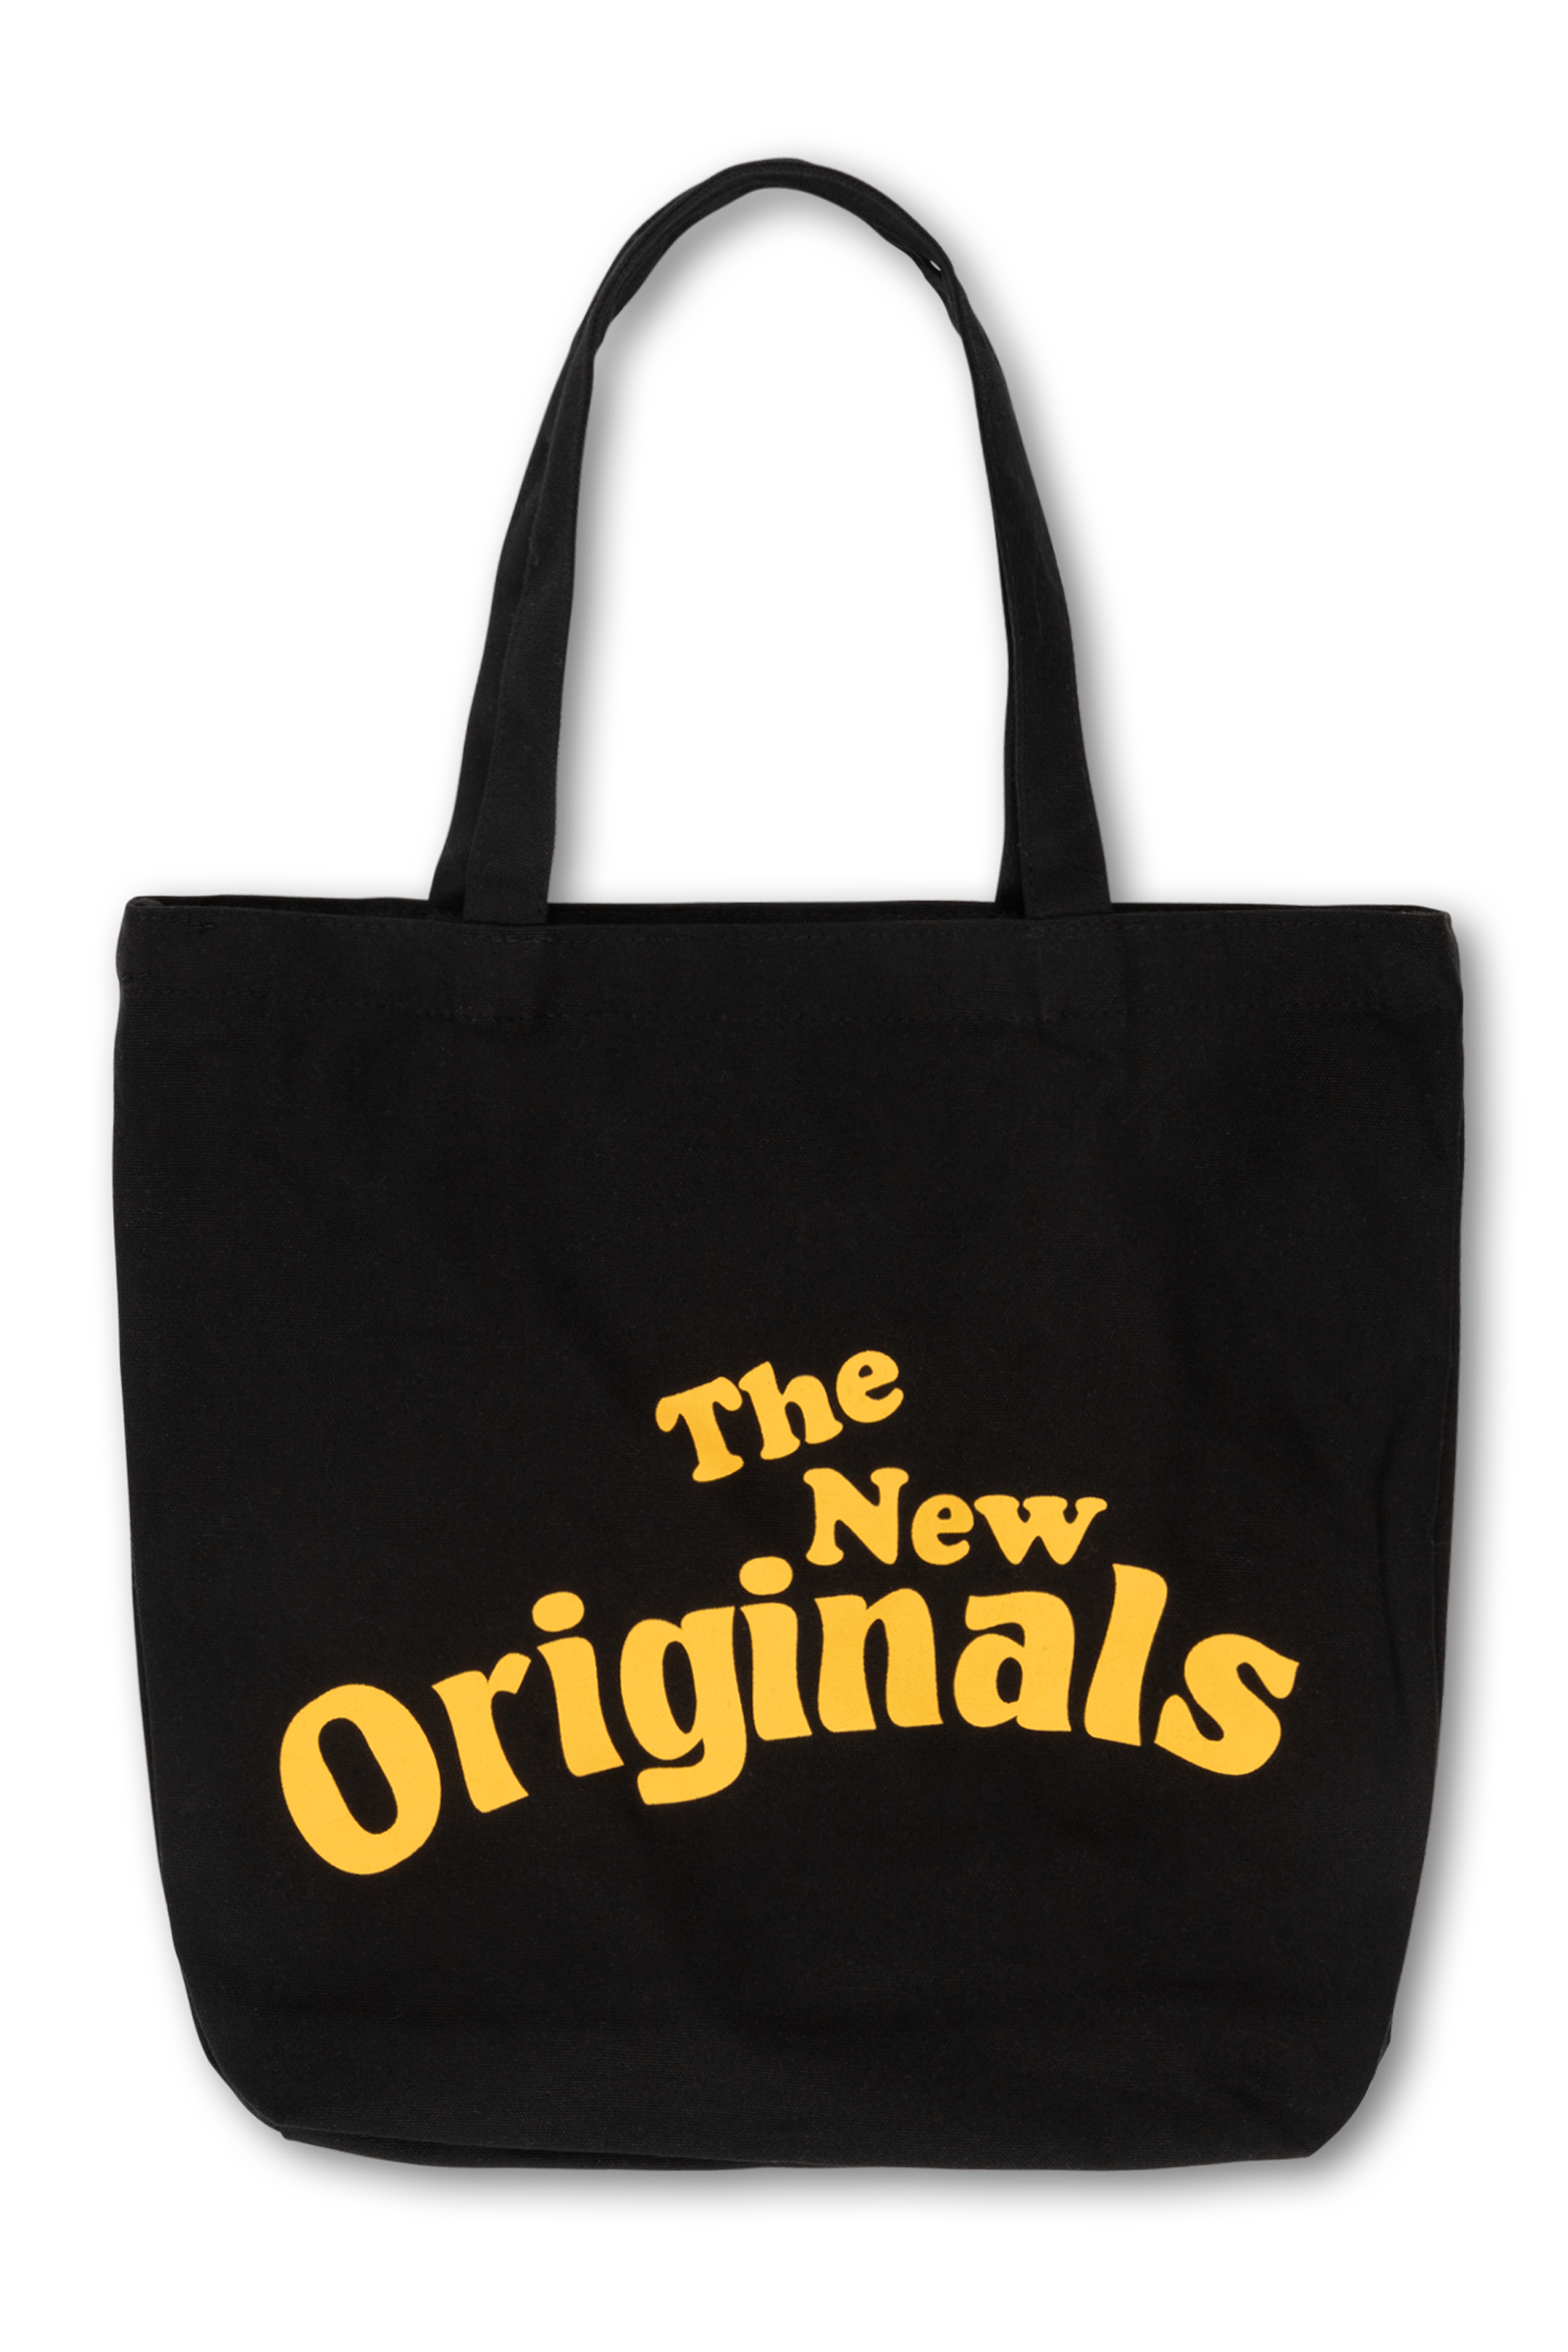 products-bag3-png